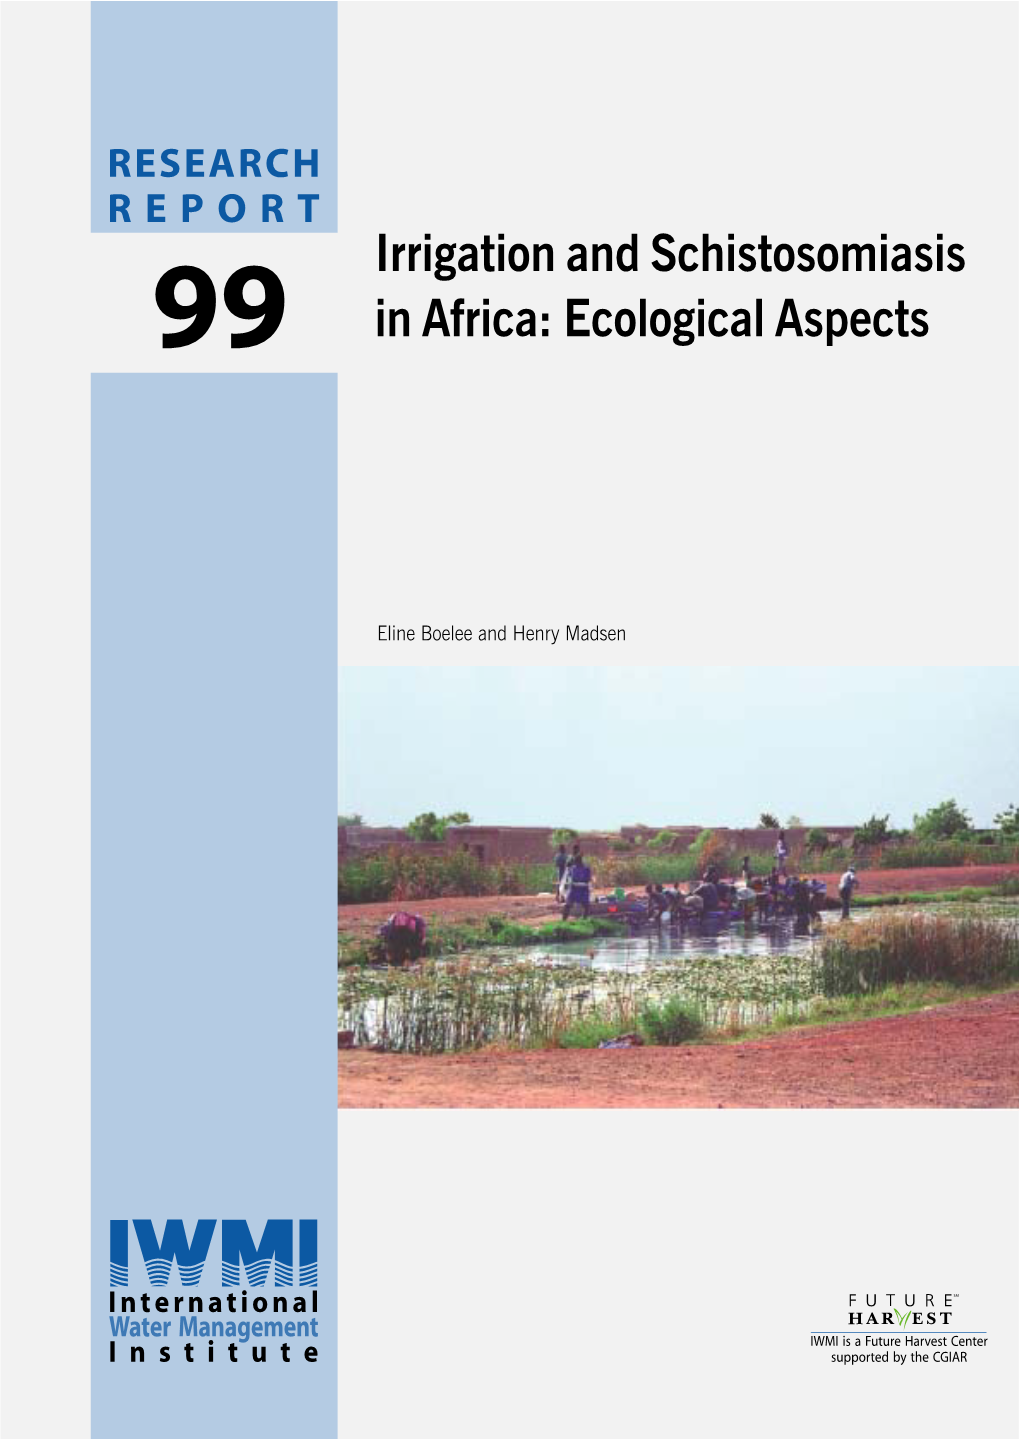 Irrigation and Schistosomiasis in Africa: Ecological Aspects